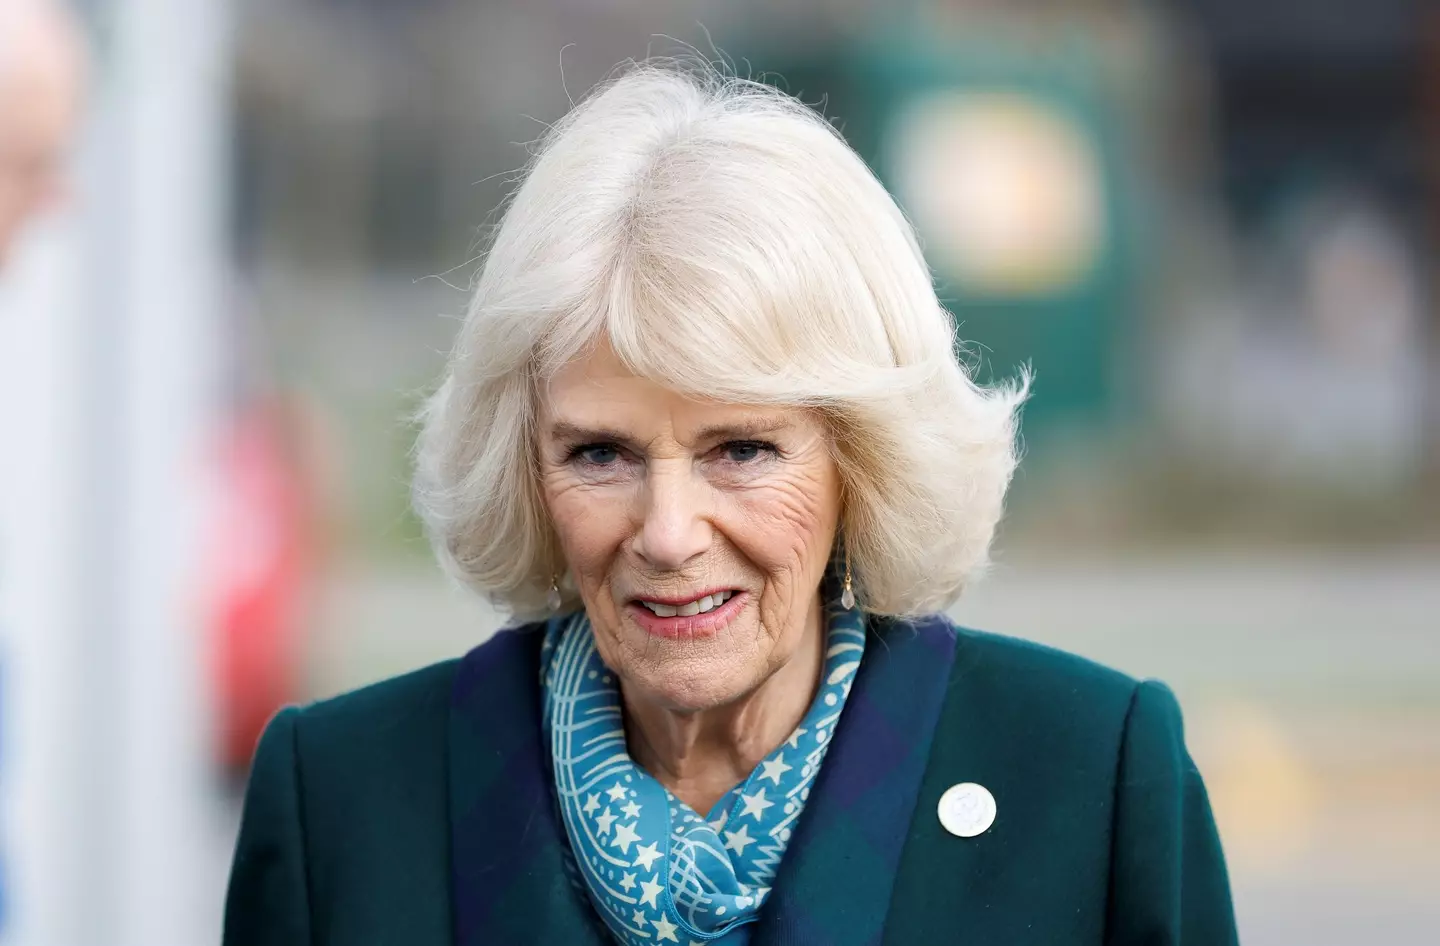 Camilla will be known as Queen Consort once Charles becomes King (